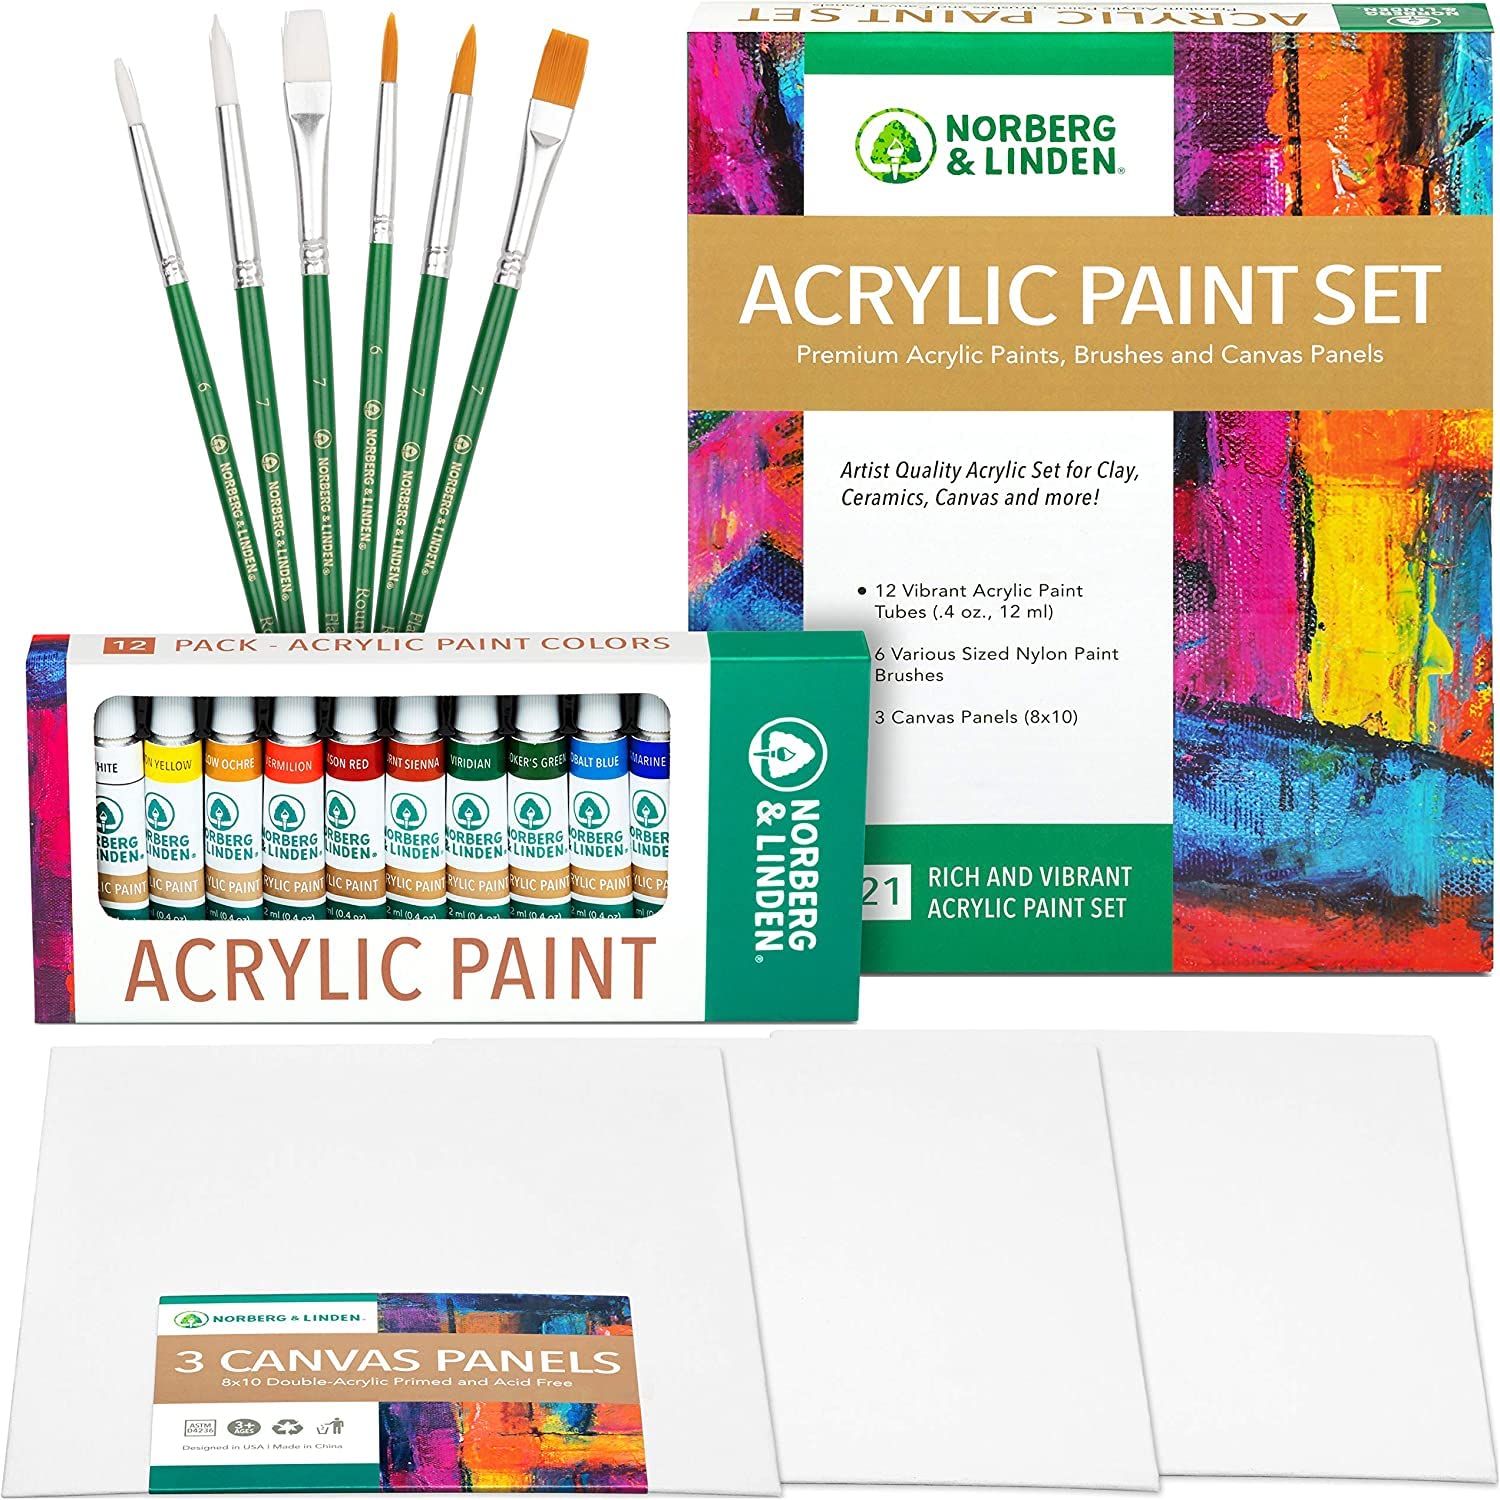 Acrylic Paint Tubes Containing The Three Primary Colors, Isolated